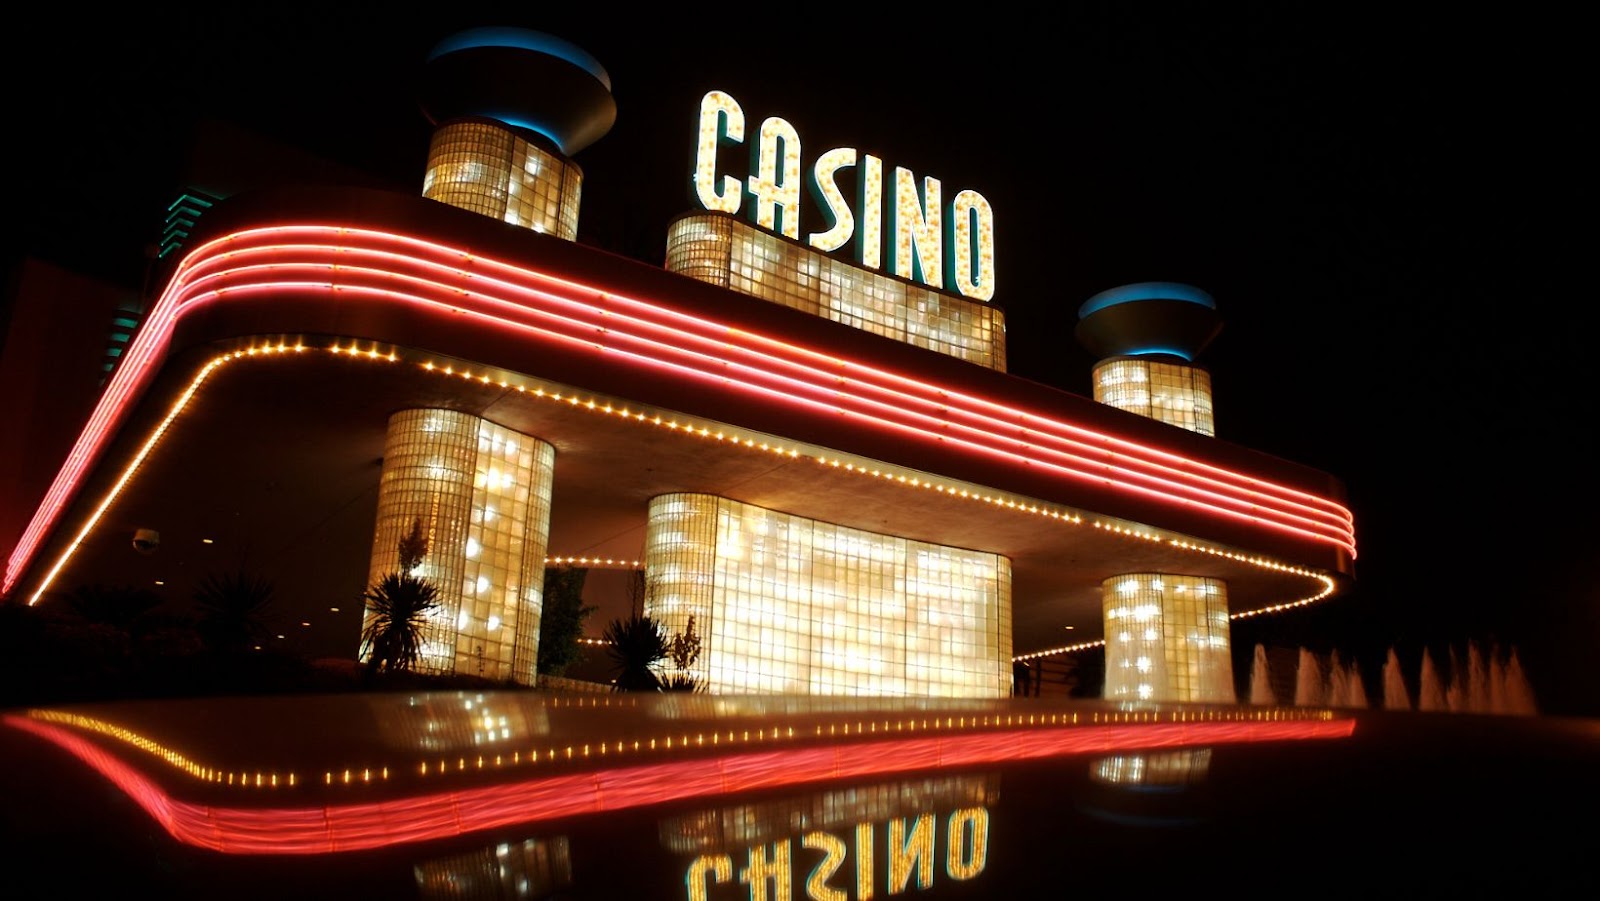 Canadian Casino Hotels to Visit